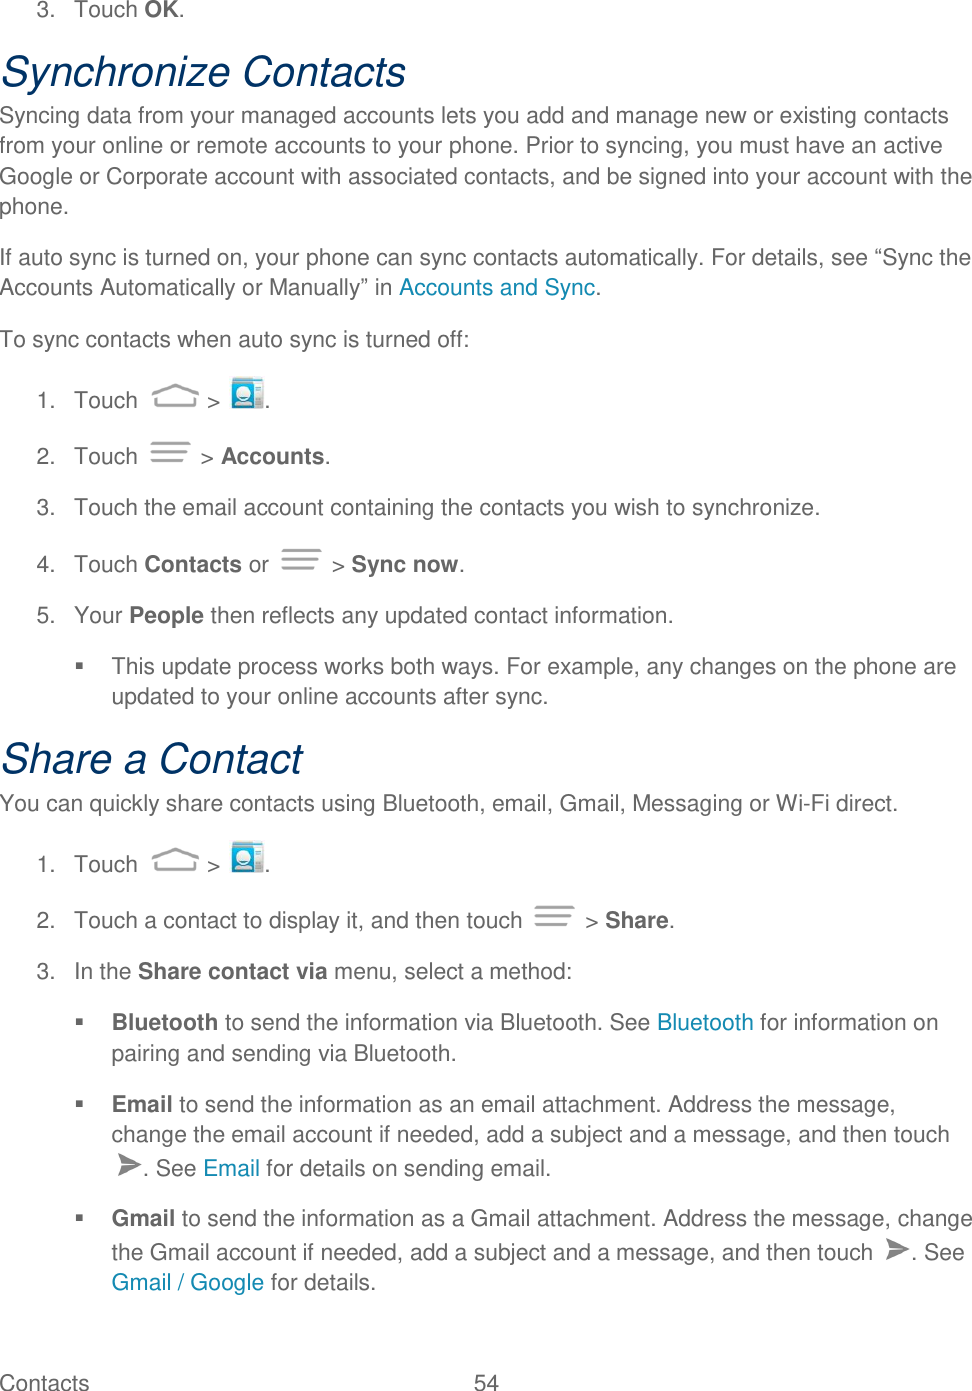 Contacts  54   3.  Touch OK. Synchronize Contacts Syncing data from your managed accounts lets you add and manage new or existing contacts from your online or remote accounts to your phone. Prior to syncing, you must have an active Google or Corporate account with associated contacts, and be signed into your account with the phone. If auto sync is turned on, your phone can sync contacts automatically. For details, see “Sync the Accounts Automatically or Manually” in Accounts and Sync. To sync contacts when auto sync is turned off: 1.  Touch   &gt;  . 2.  Touch   &gt; Accounts. 3.  Touch the email account containing the contacts you wish to synchronize. 4.  Touch Contacts or   &gt; Sync now. 5.  Your People then reflects any updated contact information.   This update process works both ways. For example, any changes on the phone are updated to your online accounts after sync. Share a Contact You can quickly share contacts using Bluetooth, email, Gmail, Messaging or Wi-Fi direct. 1.  Touch   &gt;  . 2.  Touch a contact to display it, and then touch   &gt; Share. 3.  In the Share contact via menu, select a method:  Bluetooth to send the information via Bluetooth. See Bluetooth for information on pairing and sending via Bluetooth.  Email to send the information as an email attachment. Address the message, change the email account if needed, add a subject and a message, and then touch . See Email for details on sending email.  Gmail to send the information as a Gmail attachment. Address the message, change the Gmail account if needed, add a subject and a message, and then touch  . See Gmail / Google for details. 